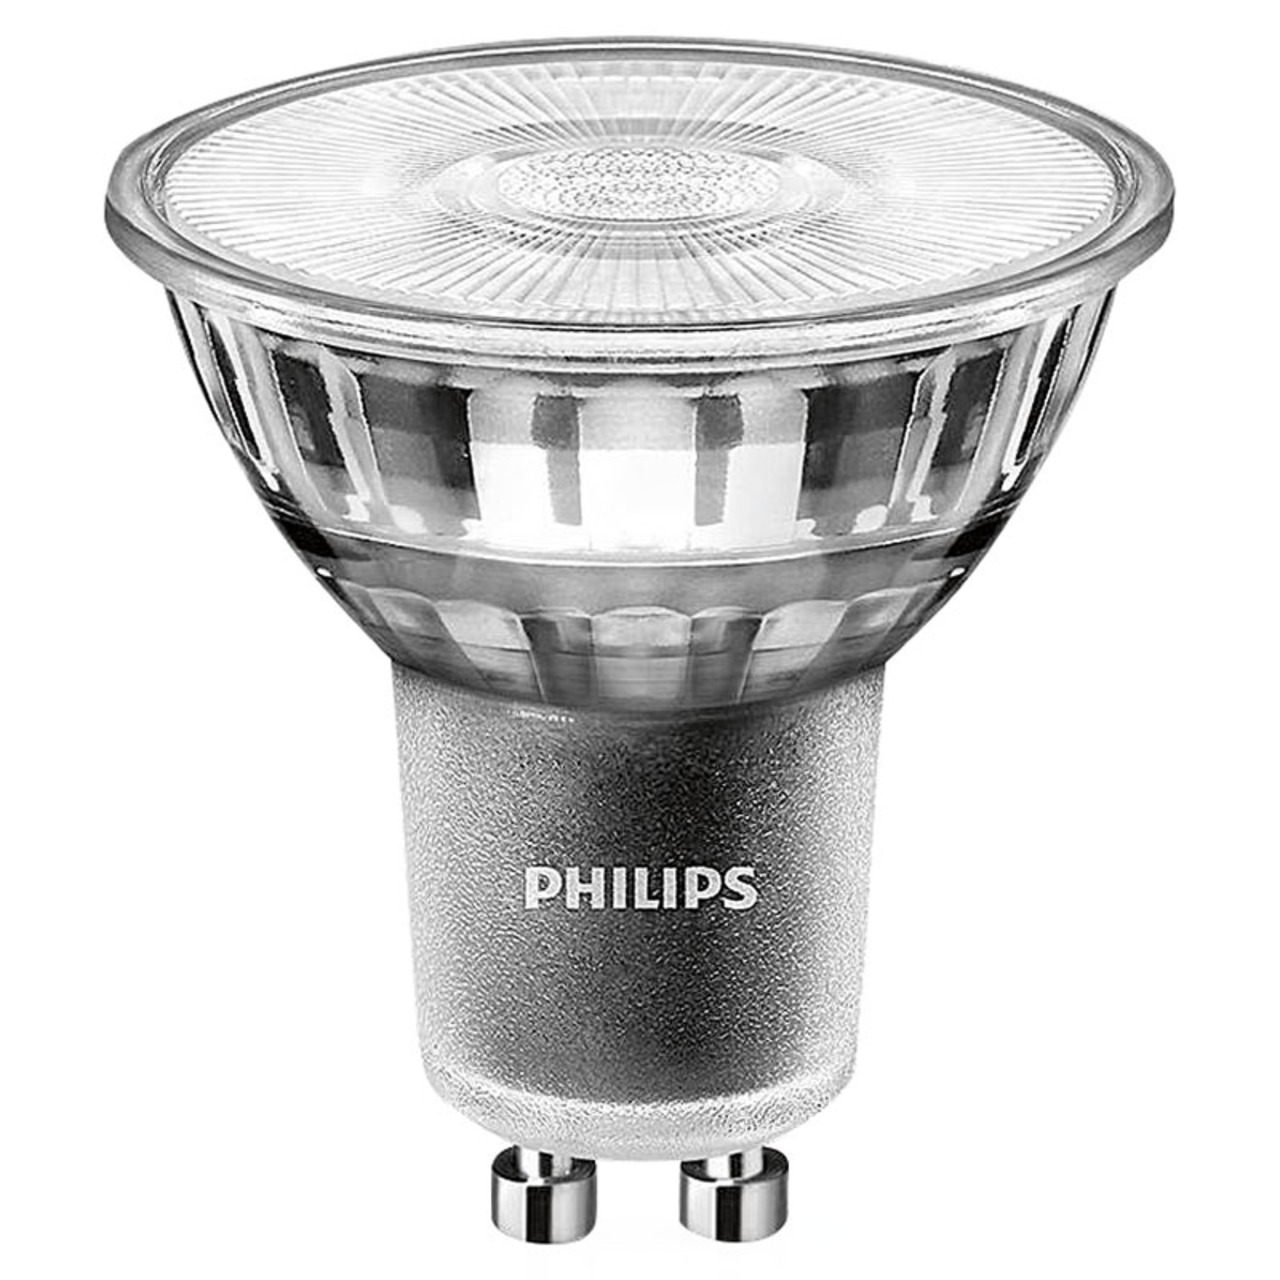 Philips MASTER ExpertColor 3-9-W-GU10-LED-Lampe- 97 Ra- 2700K- warmweiss- dimmbar unter Beleuchtung